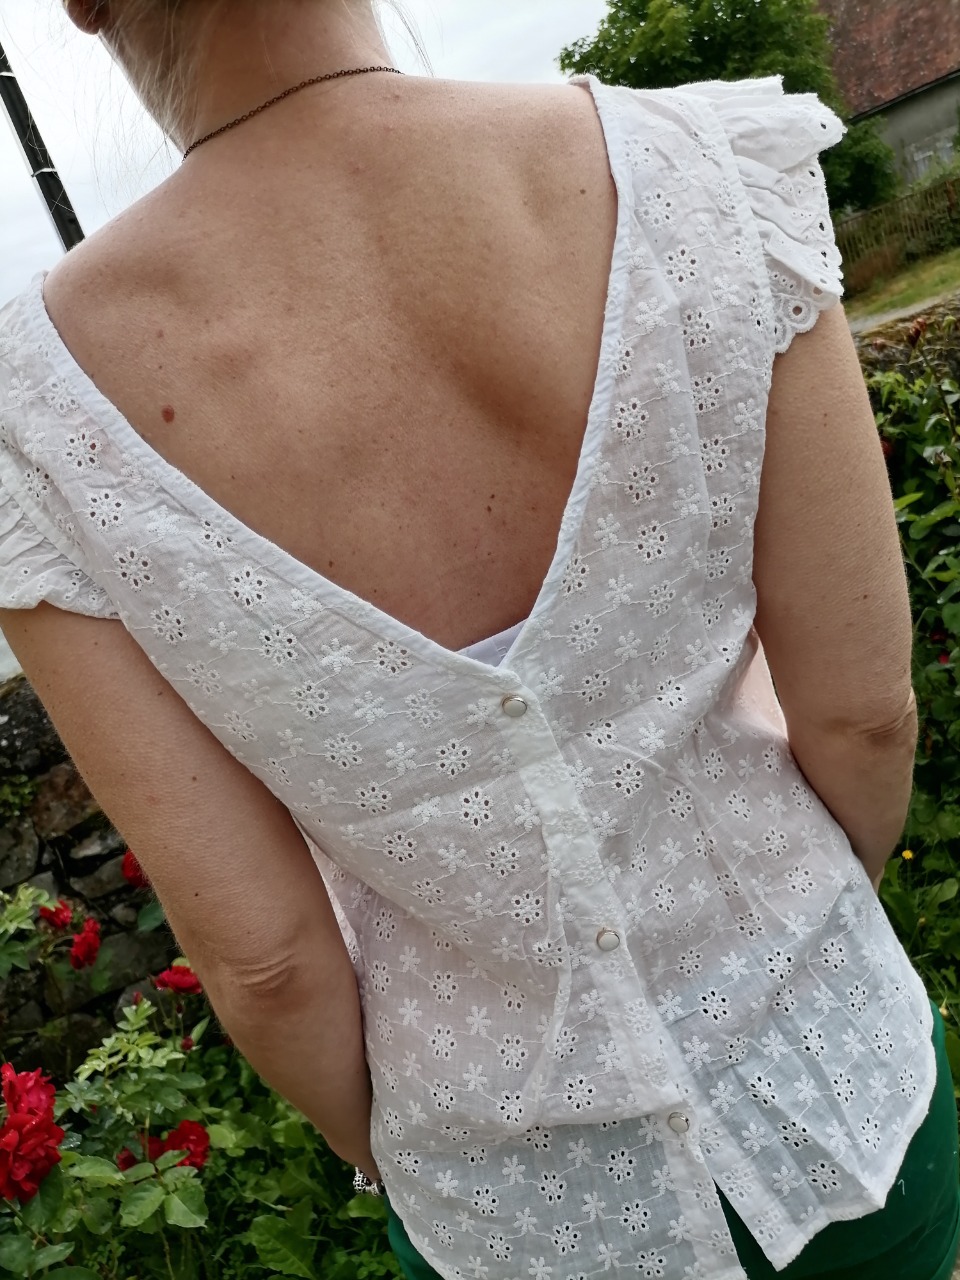 Top broderie blanc